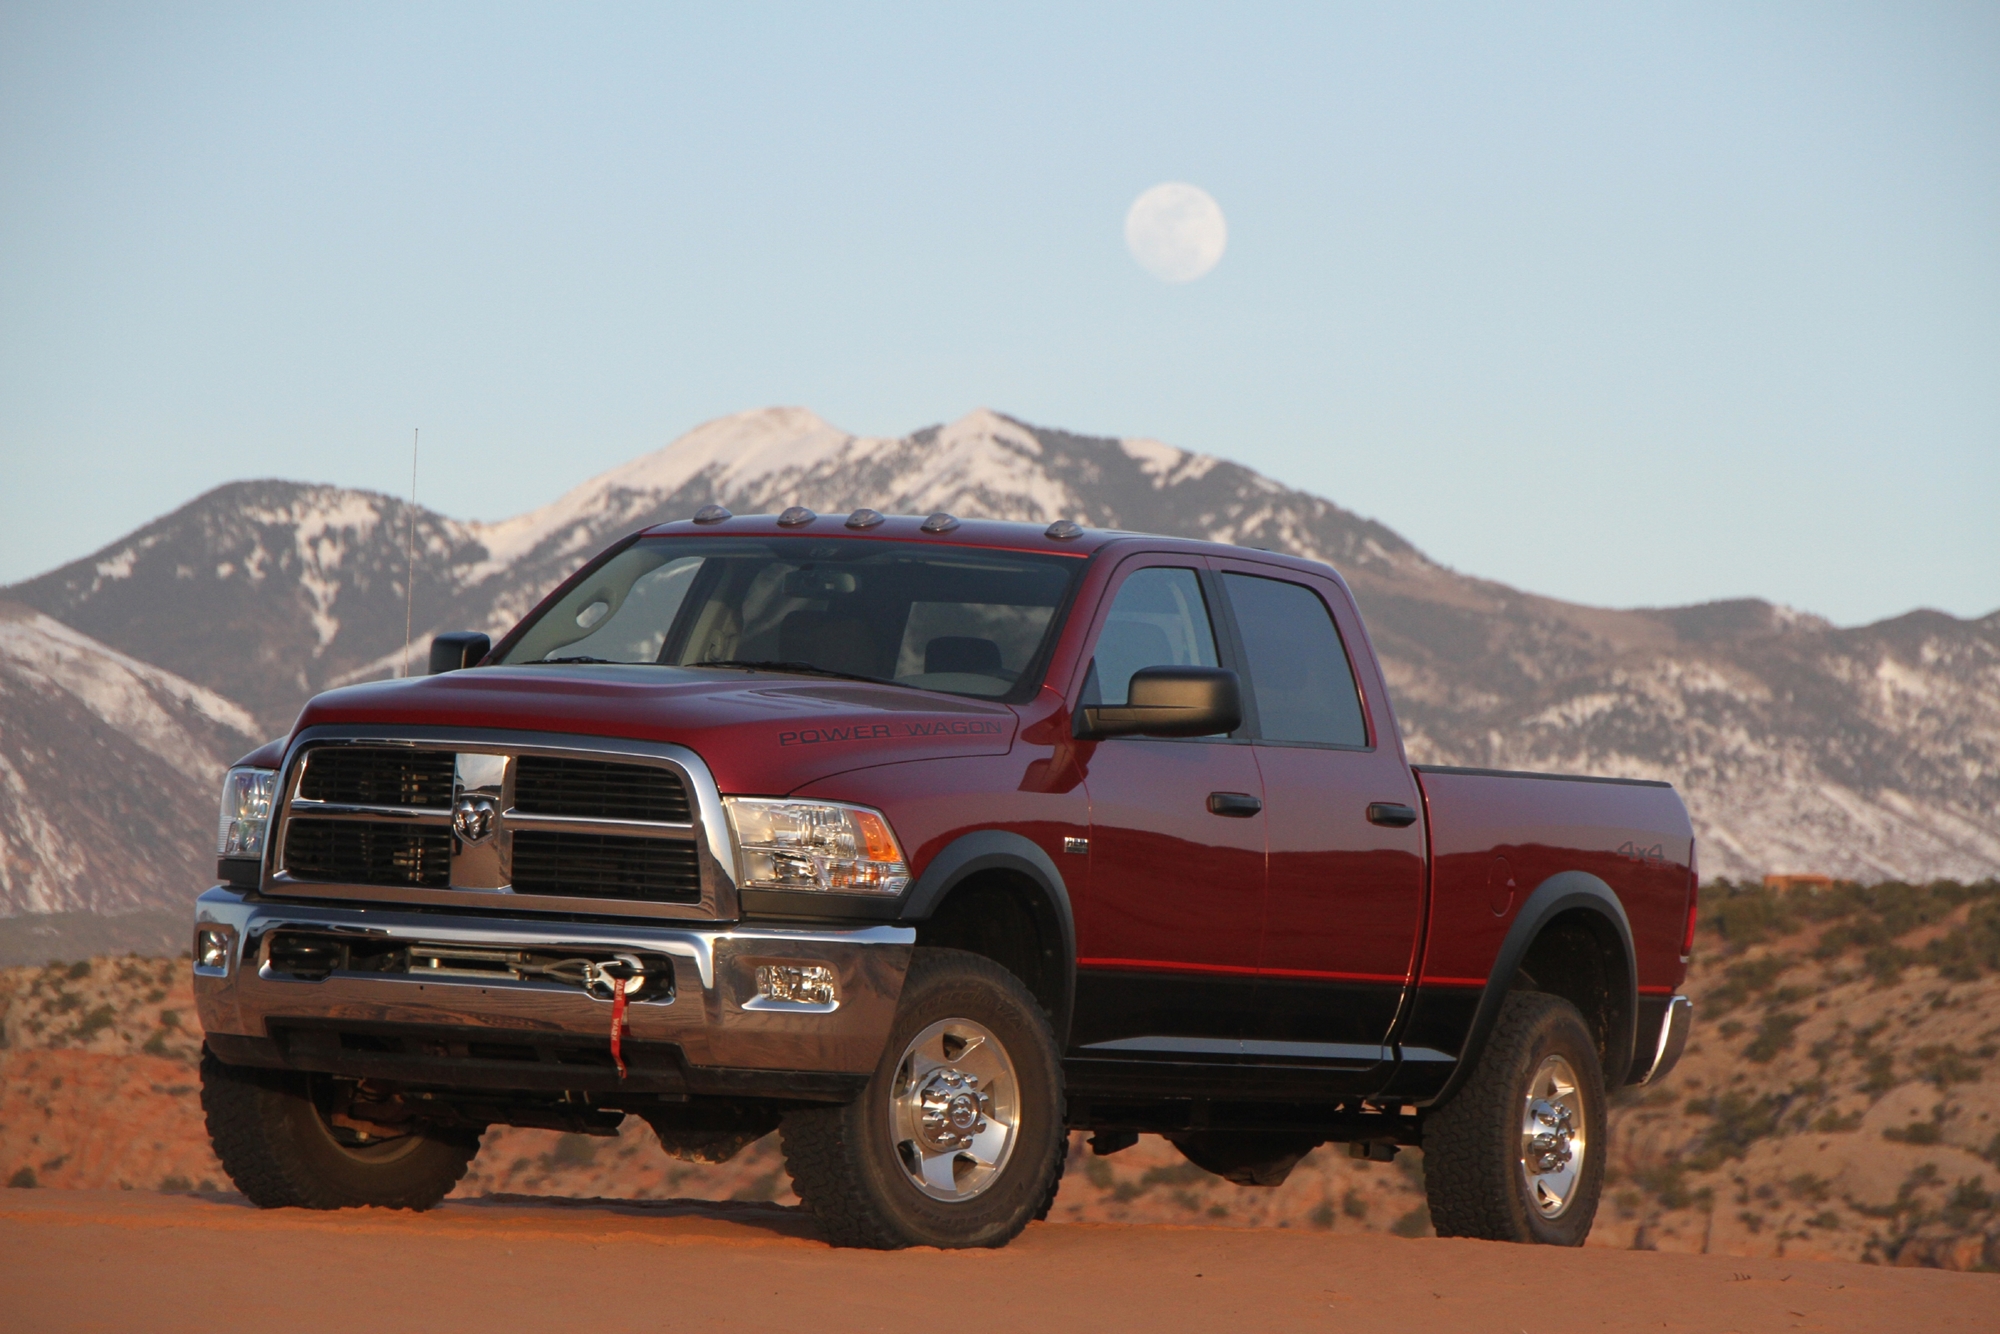 2008 Dodge Ram 3500 ST Full Specs, Features and Price | CarBuzz 2008 Dodge Ram 3500 Fuel Tank Capacity